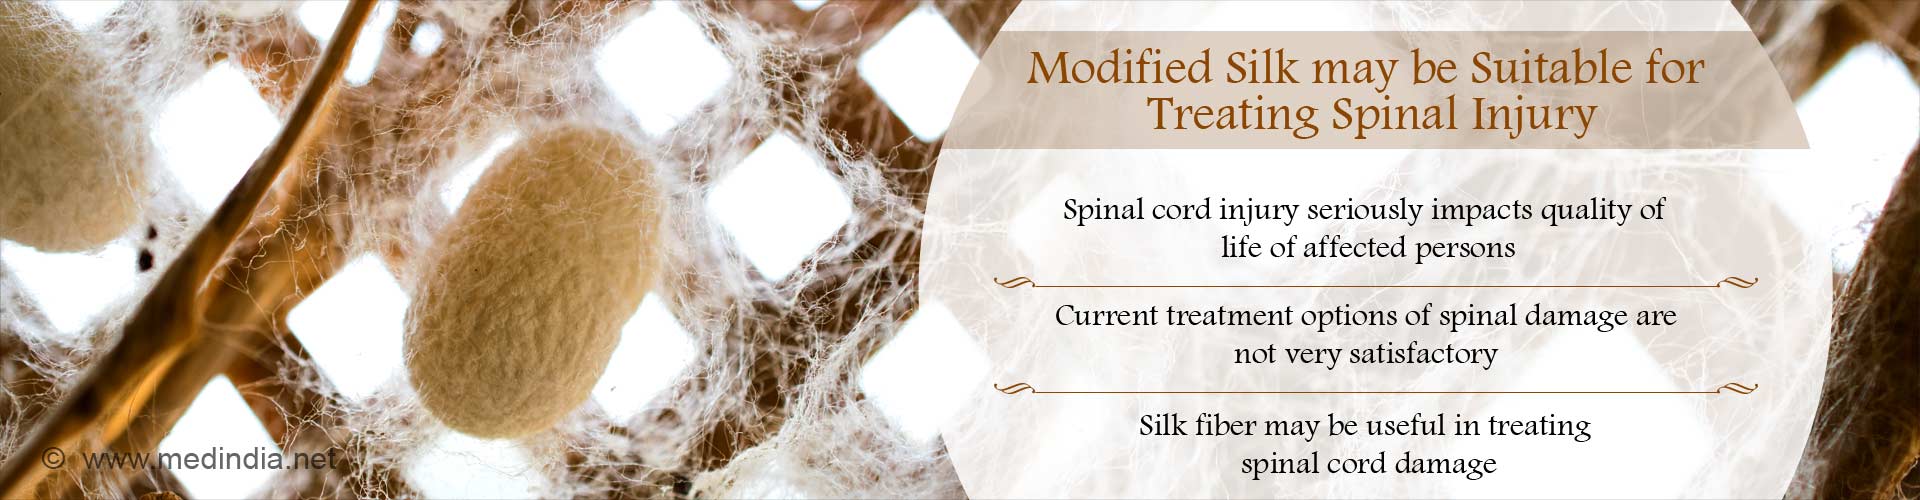 Modified silk may be suitable for treating spinal injury
- Spinal cord injury seriously impacts quality of life of affected persons
- current treatment options if spinal damage are not very satisfactory
- Silk fiber may be useful in treating spinal cord damage